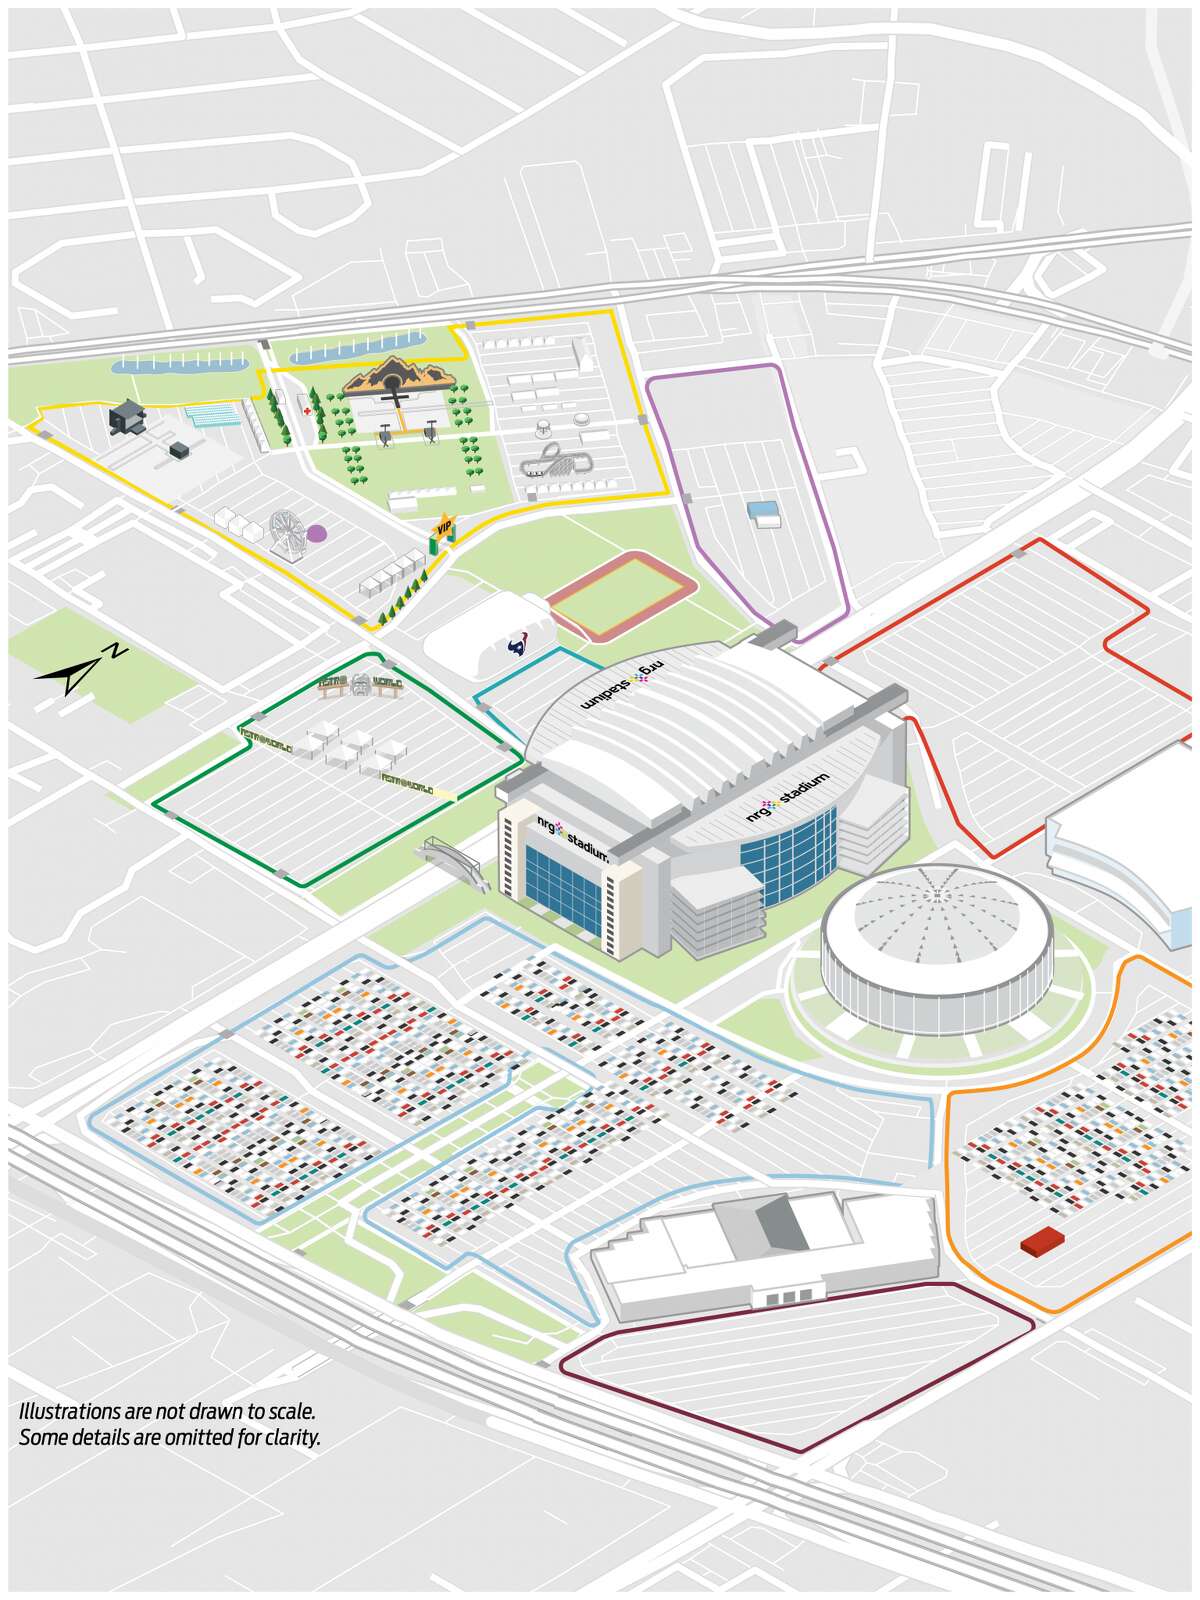 Illustration of the layout of Astroworld including NRG stadium and parking lots